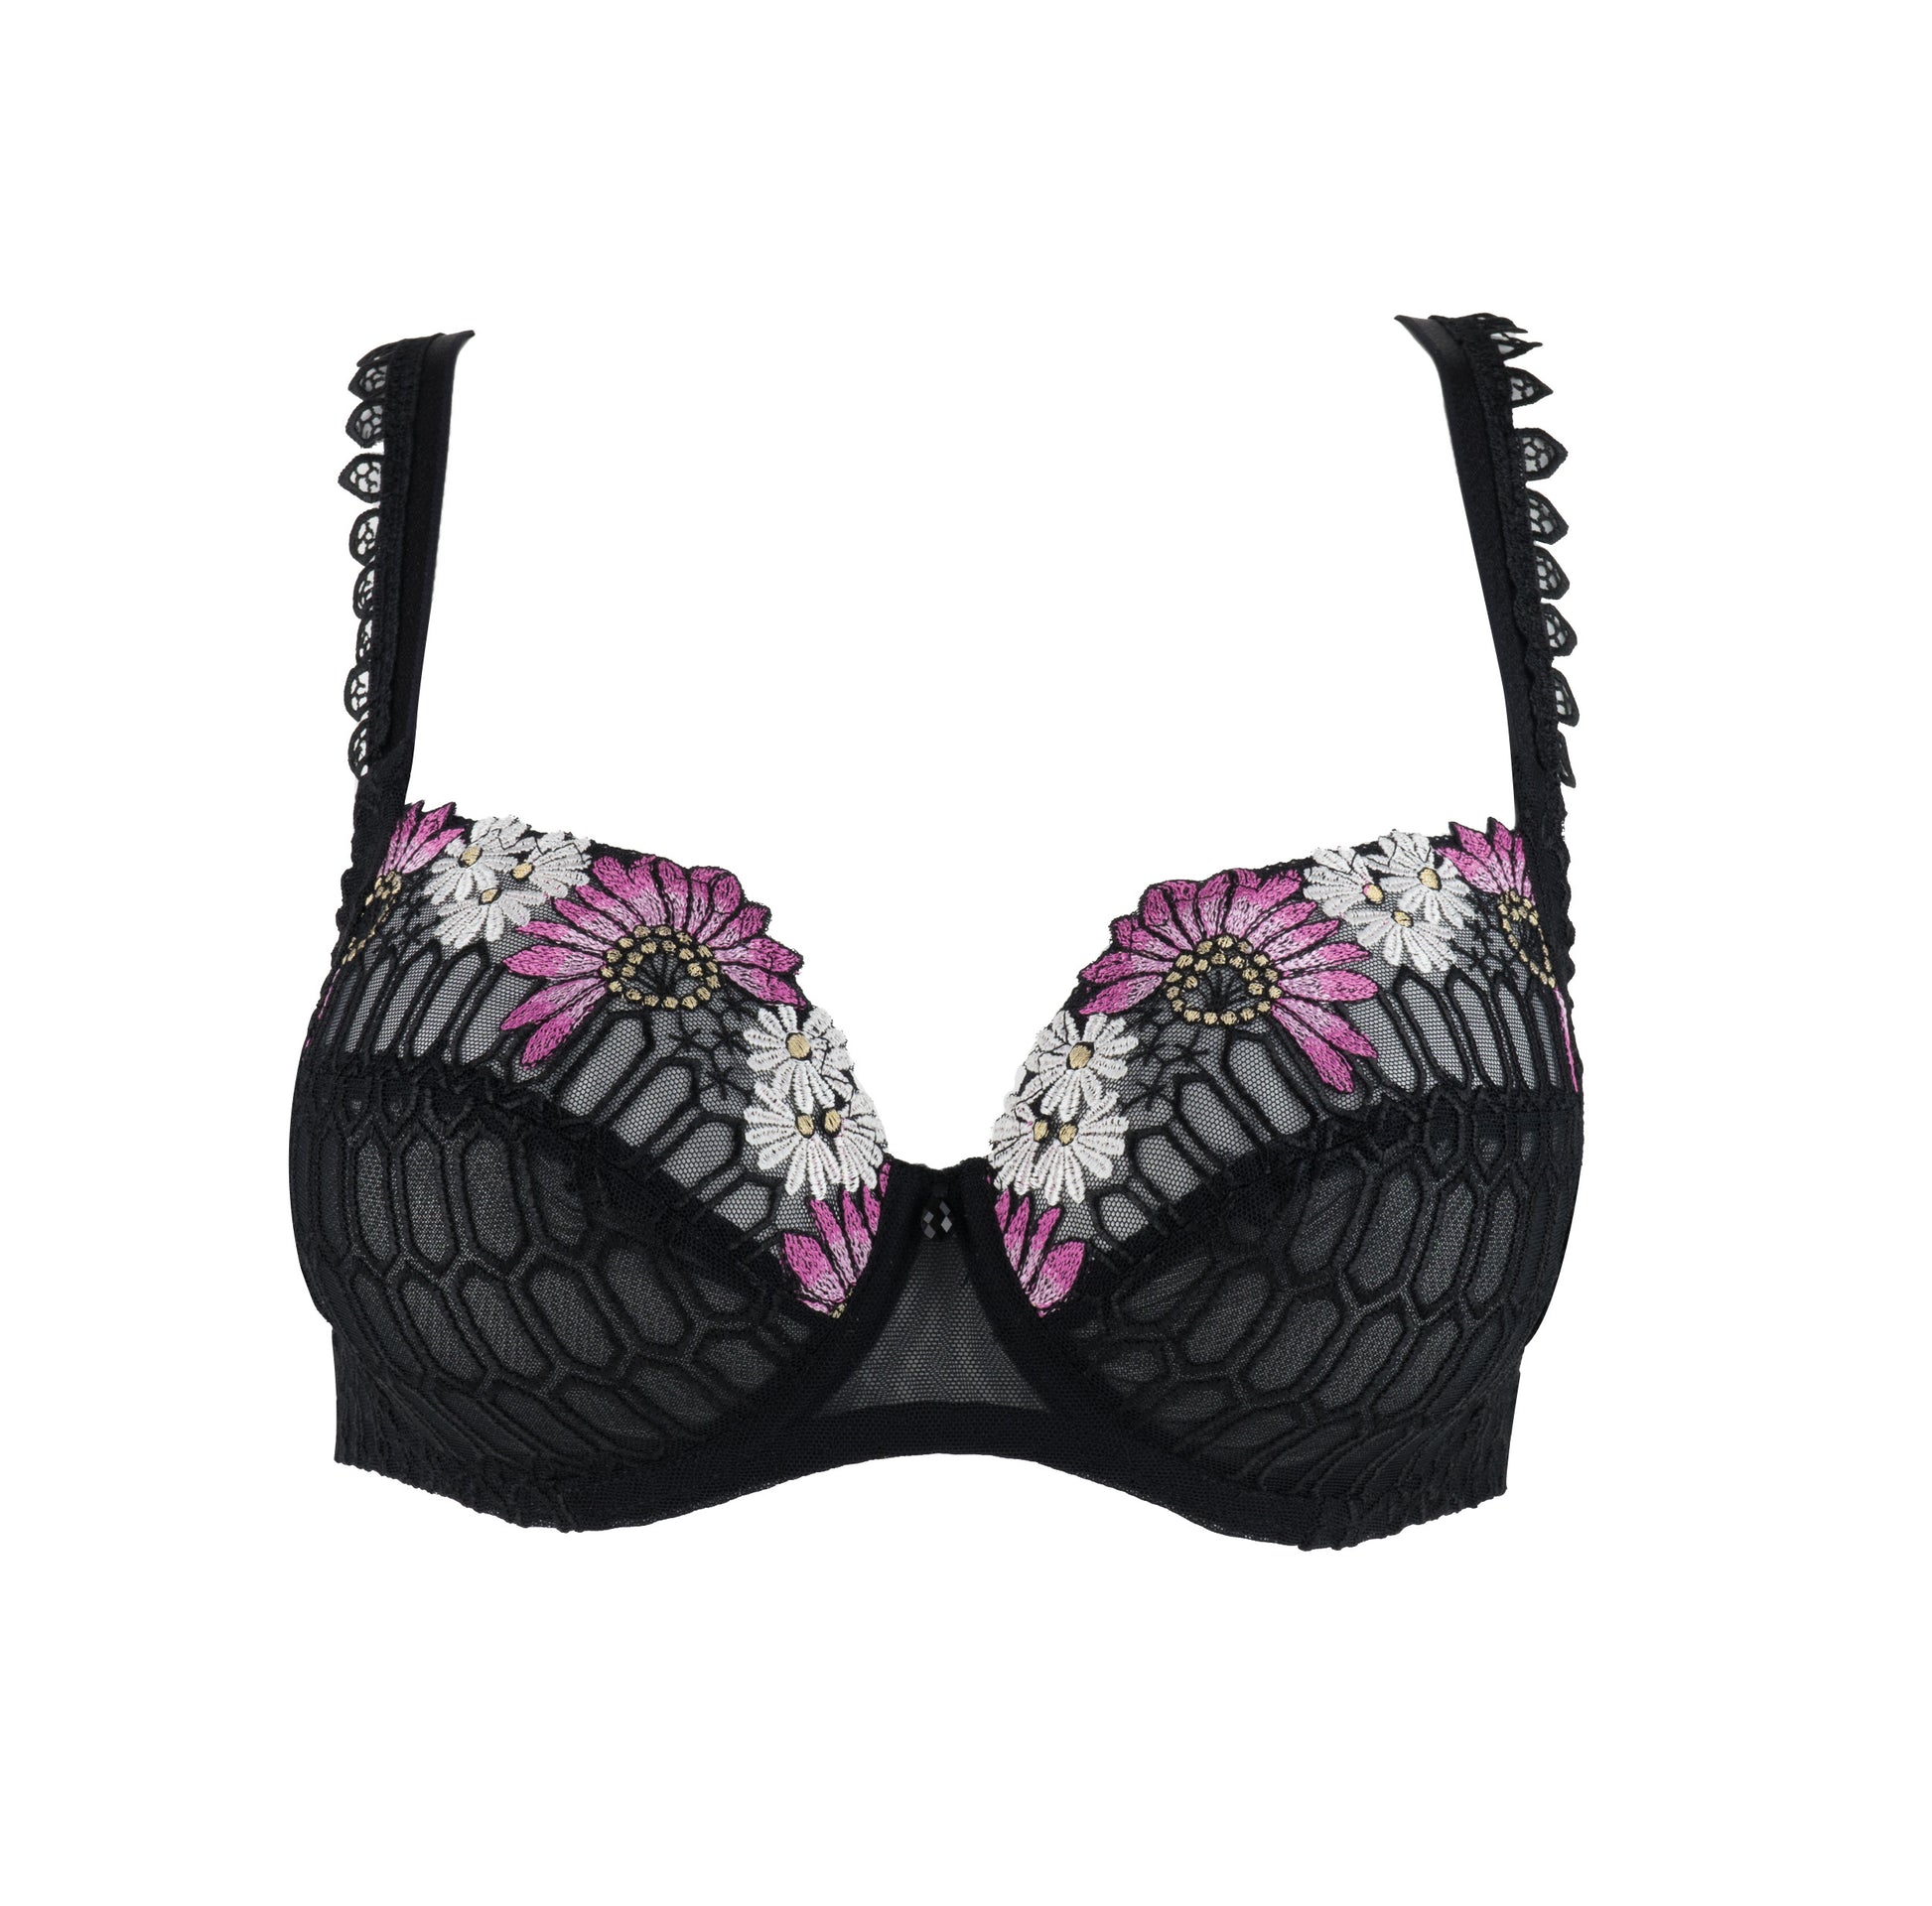 The Flower Power line of this Louisa Bracq semi-sheer soft full cup bra is decorated with intricate embroidery.